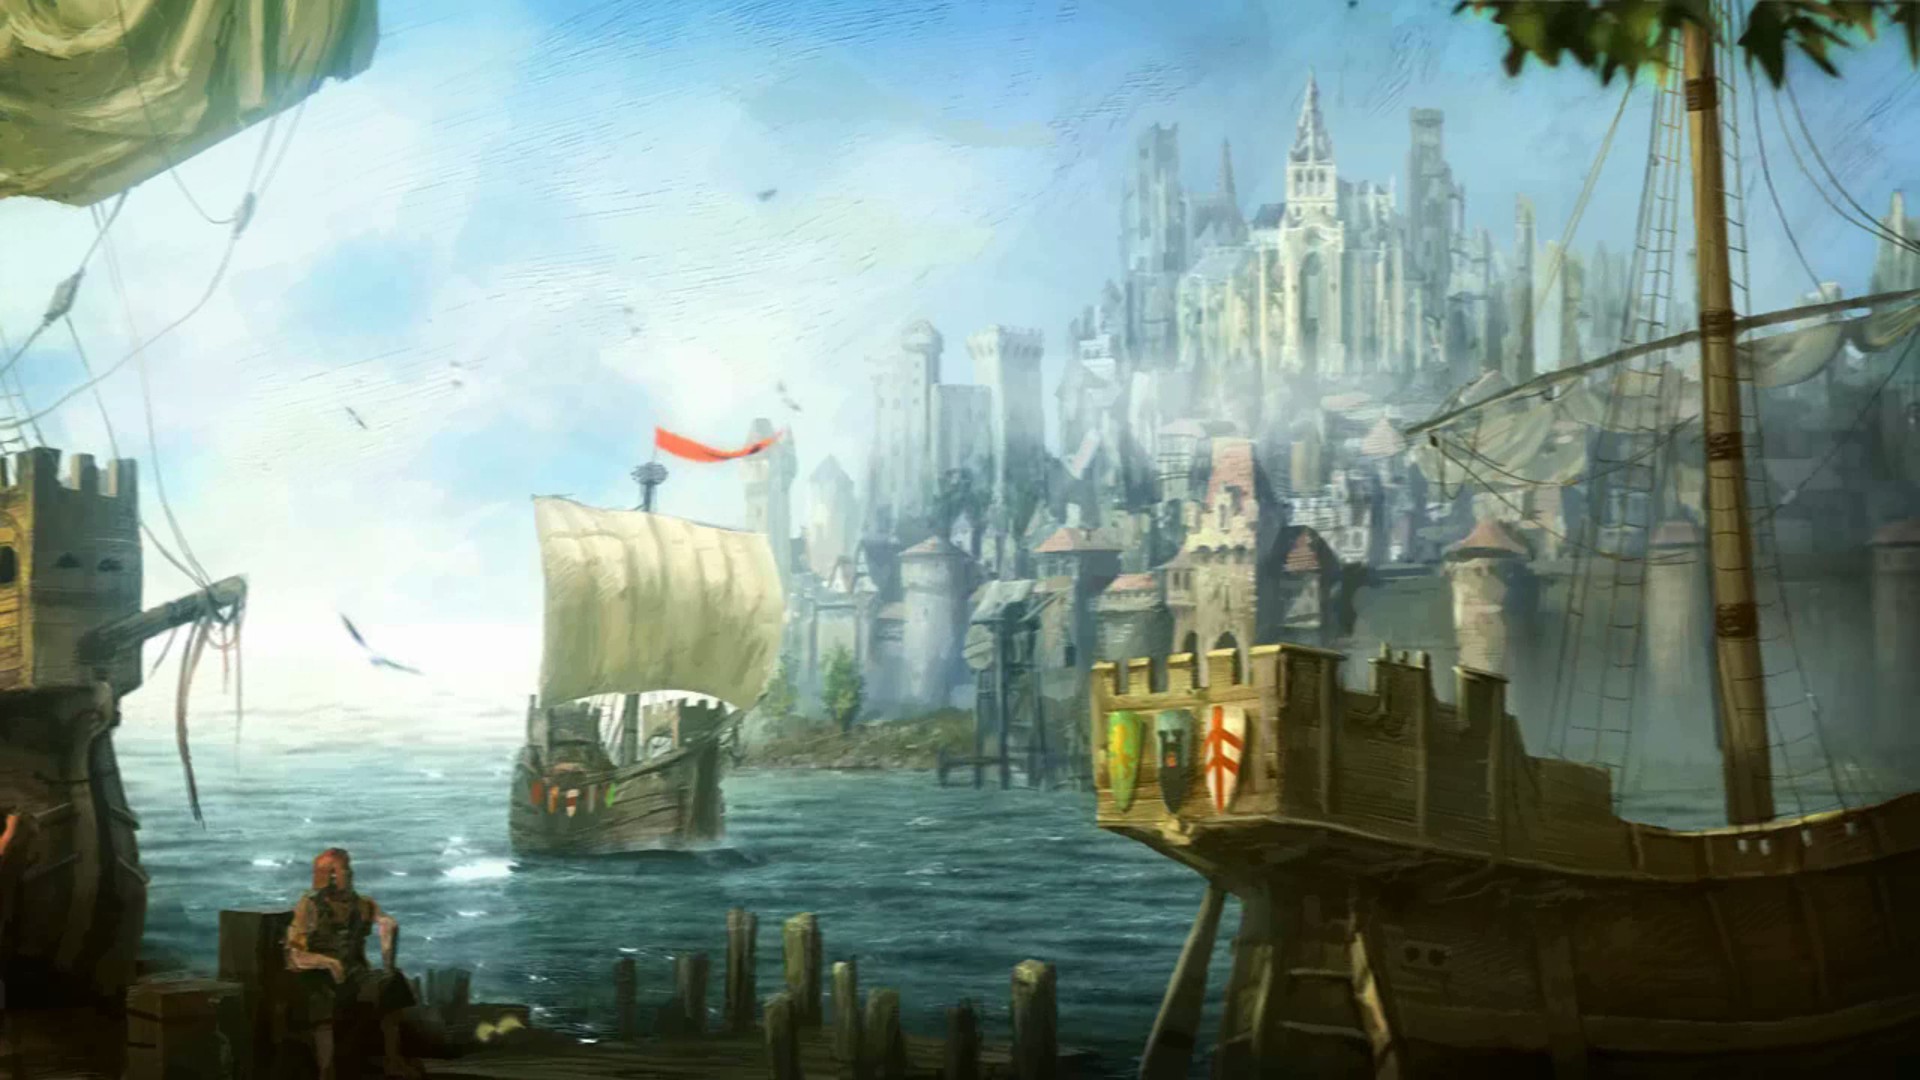 anno 1404 venice unable to sink ships